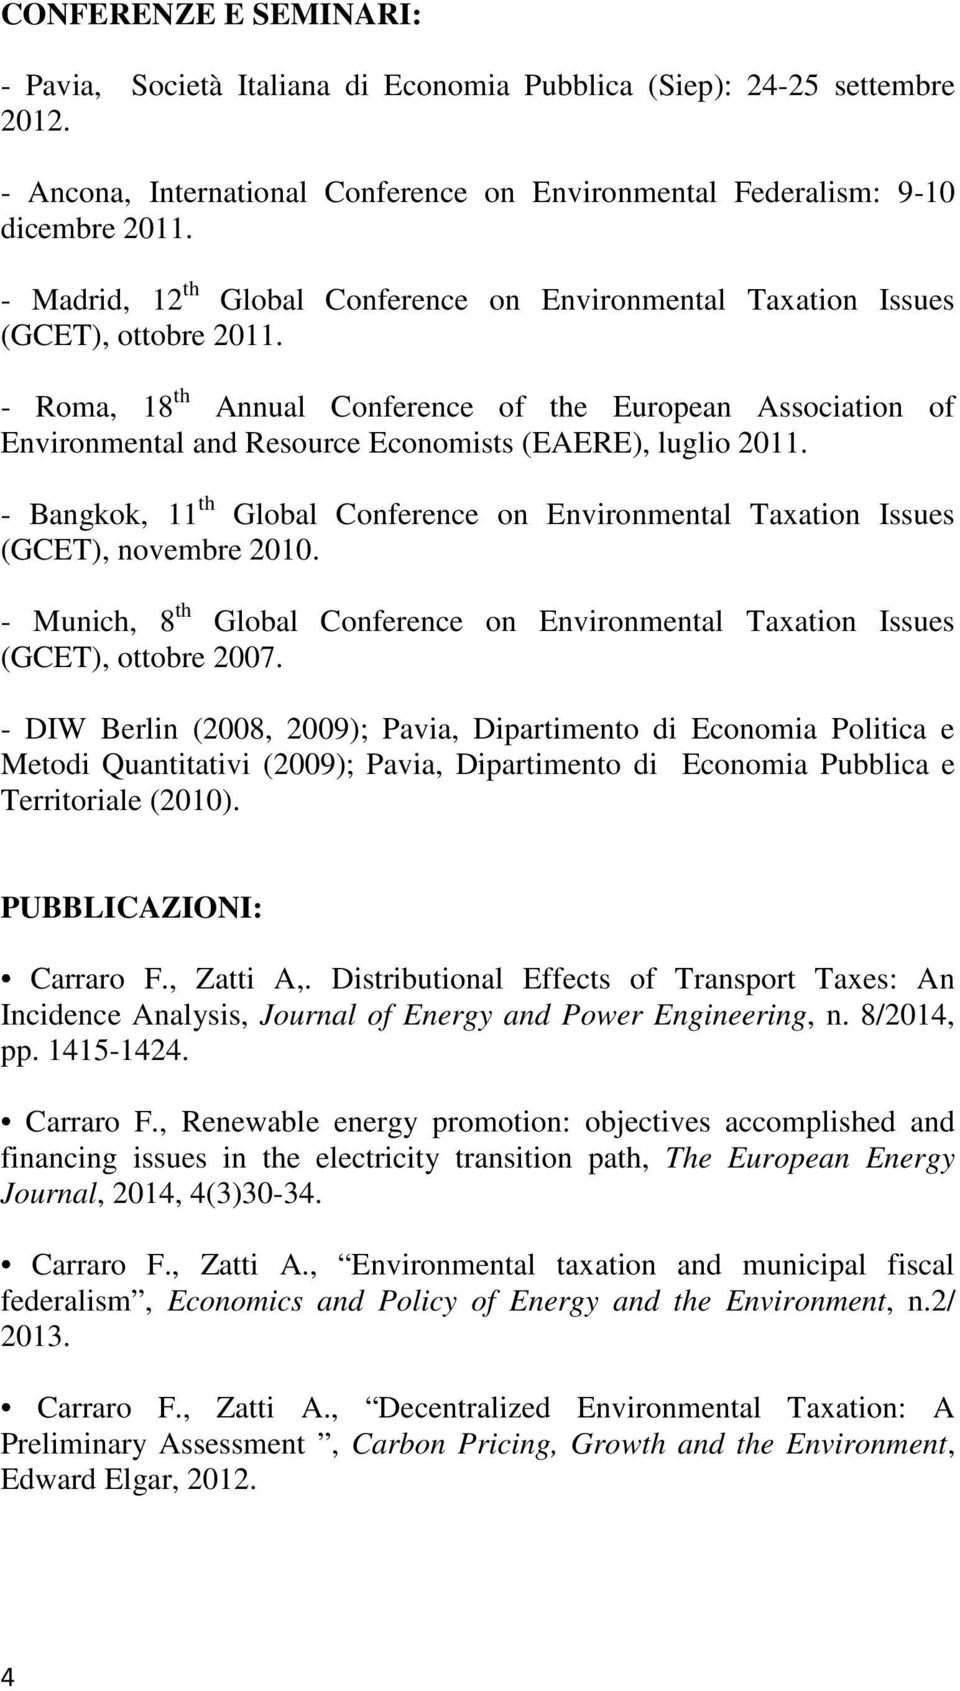 - Roma, 18 th Annual Conference of the European Association of Environmental and Resource Economists (EAERE), luglio 2011.